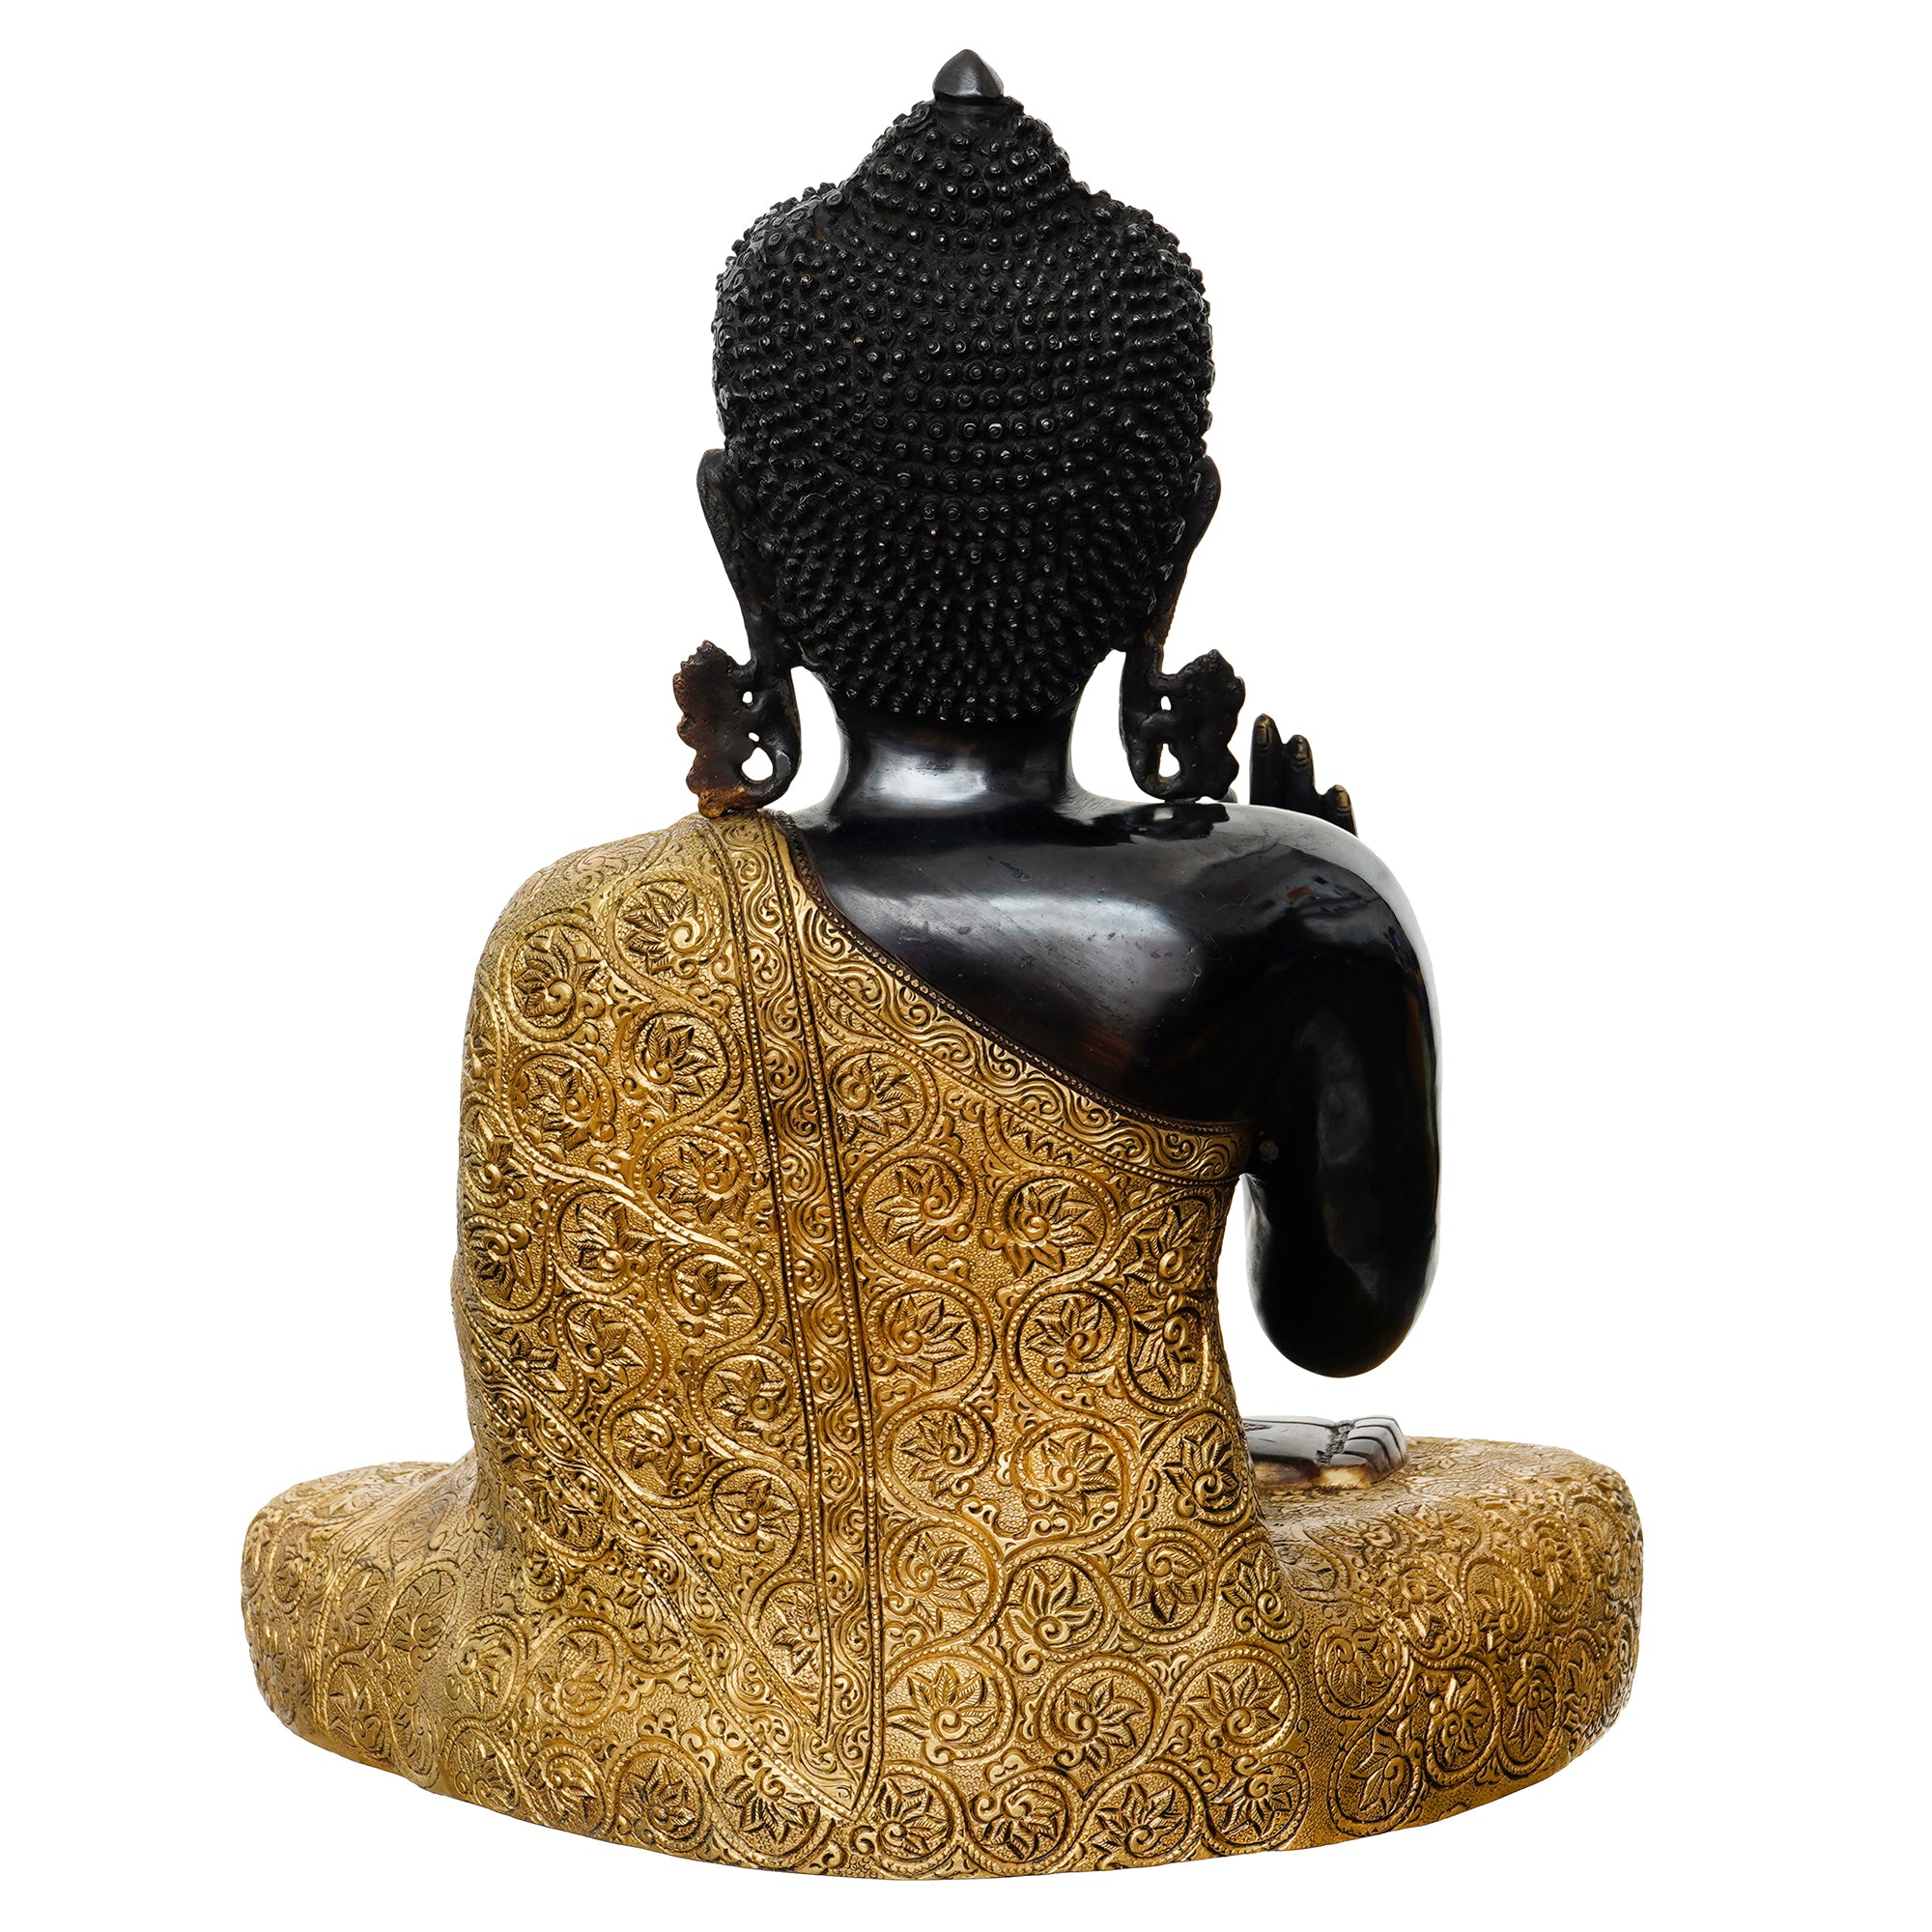 Golden and Black Brass Handcrafted Peaceful Meditating Lord Buddha Statue 6